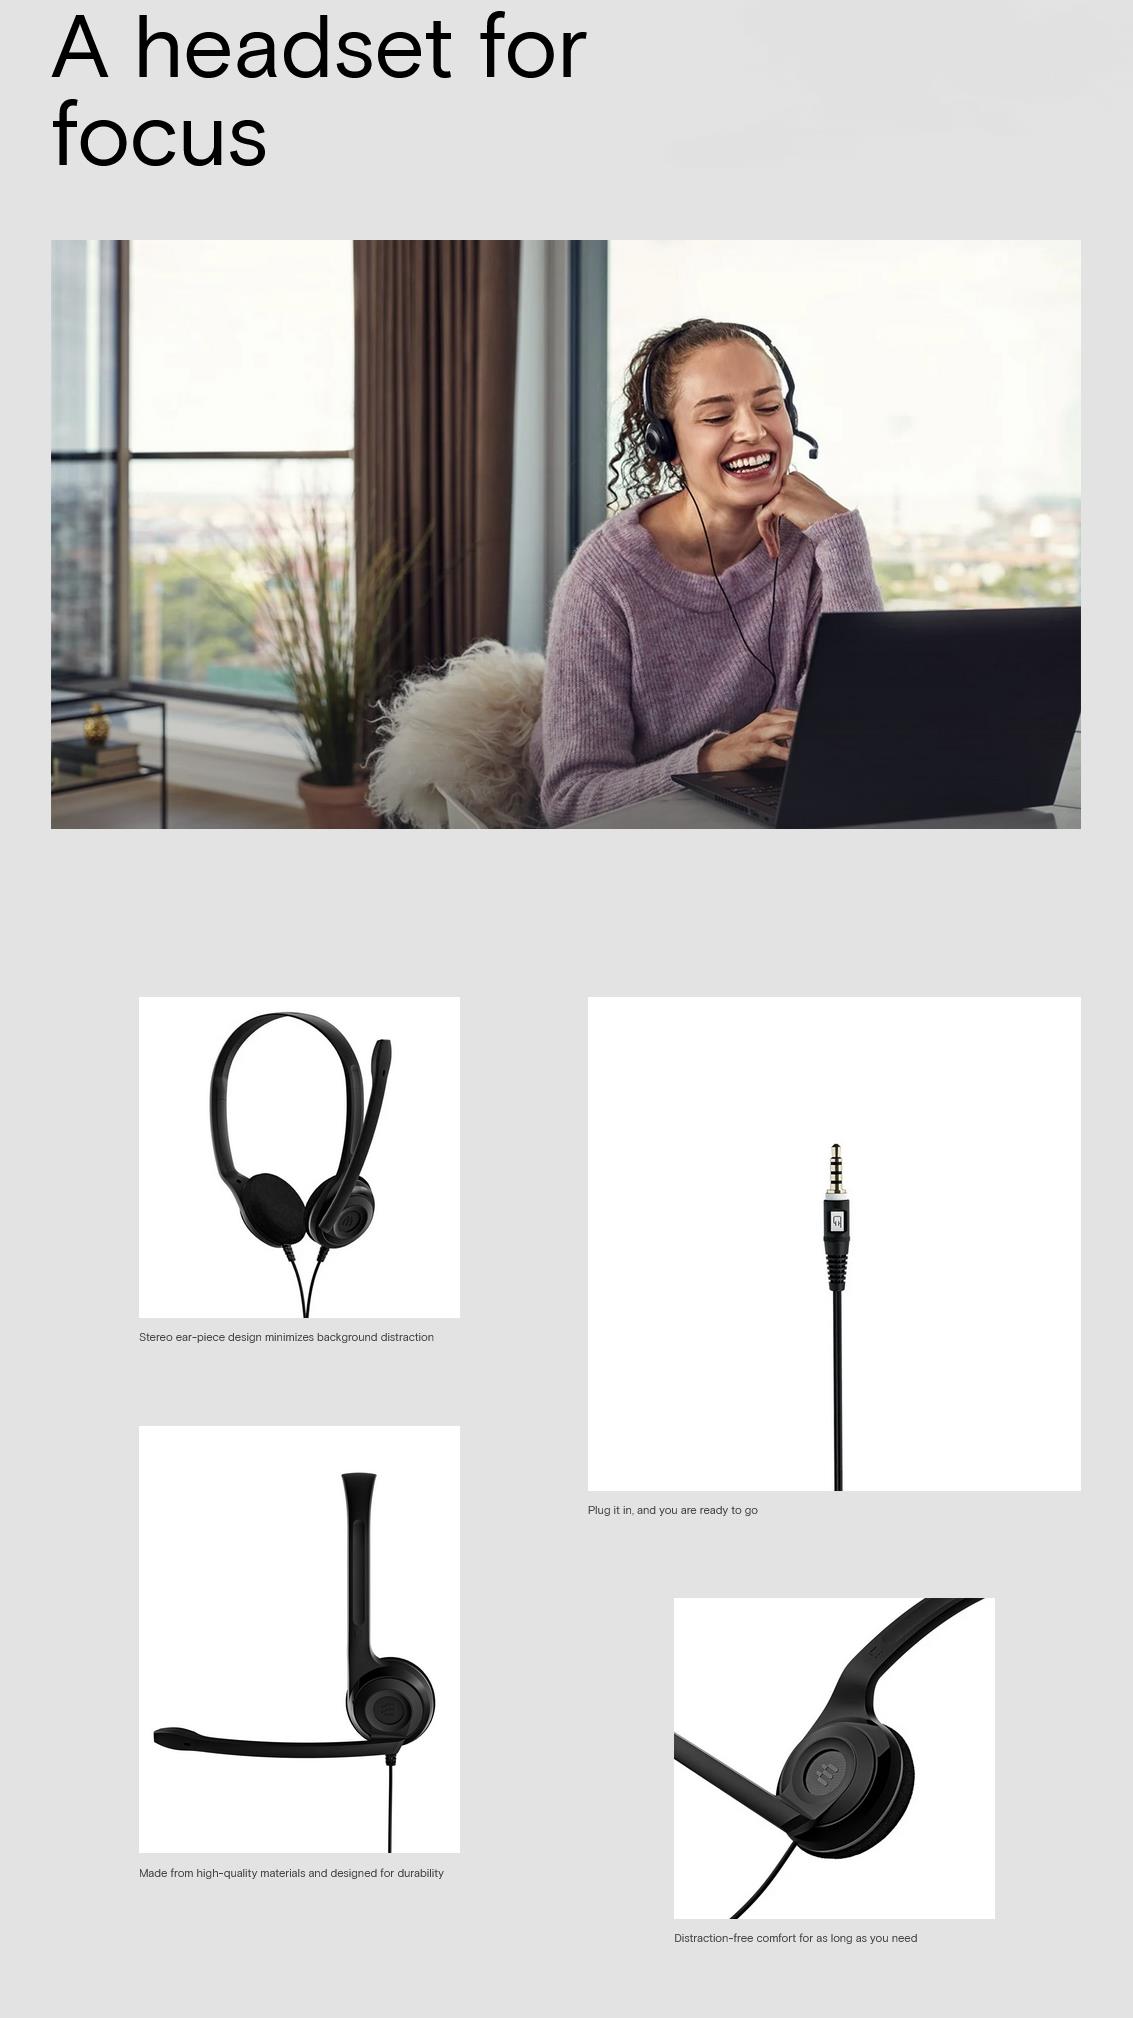 A large marketing image providing additional information about the product EPOS PC 5 Chat - Stereo Headset - Additional alt info not provided